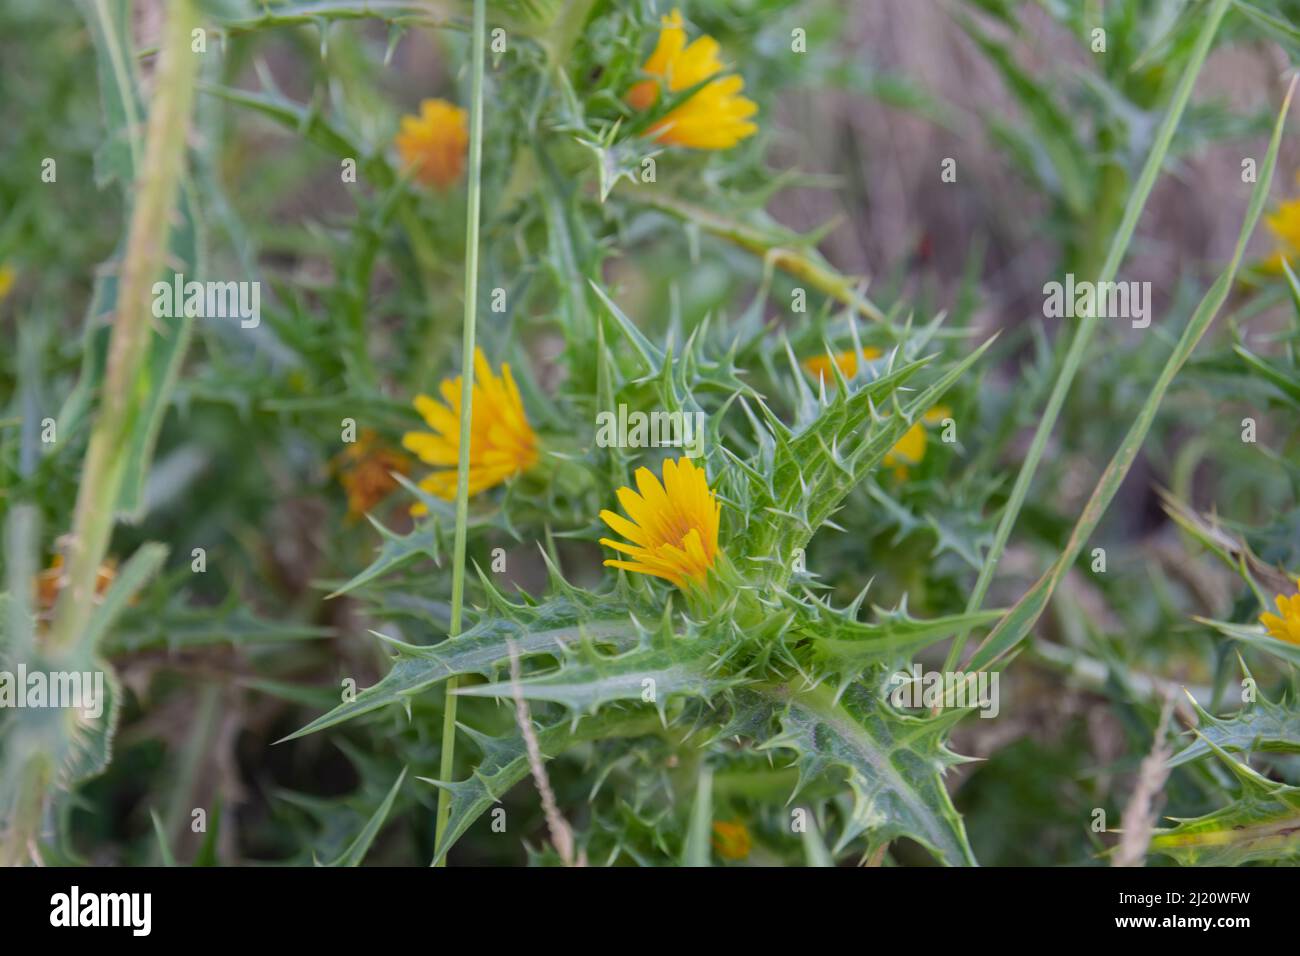 Benedictine herb, Cnicus, Benedictus is an important medicinal plant and poisonous plant with orange flowers. Stock Photo